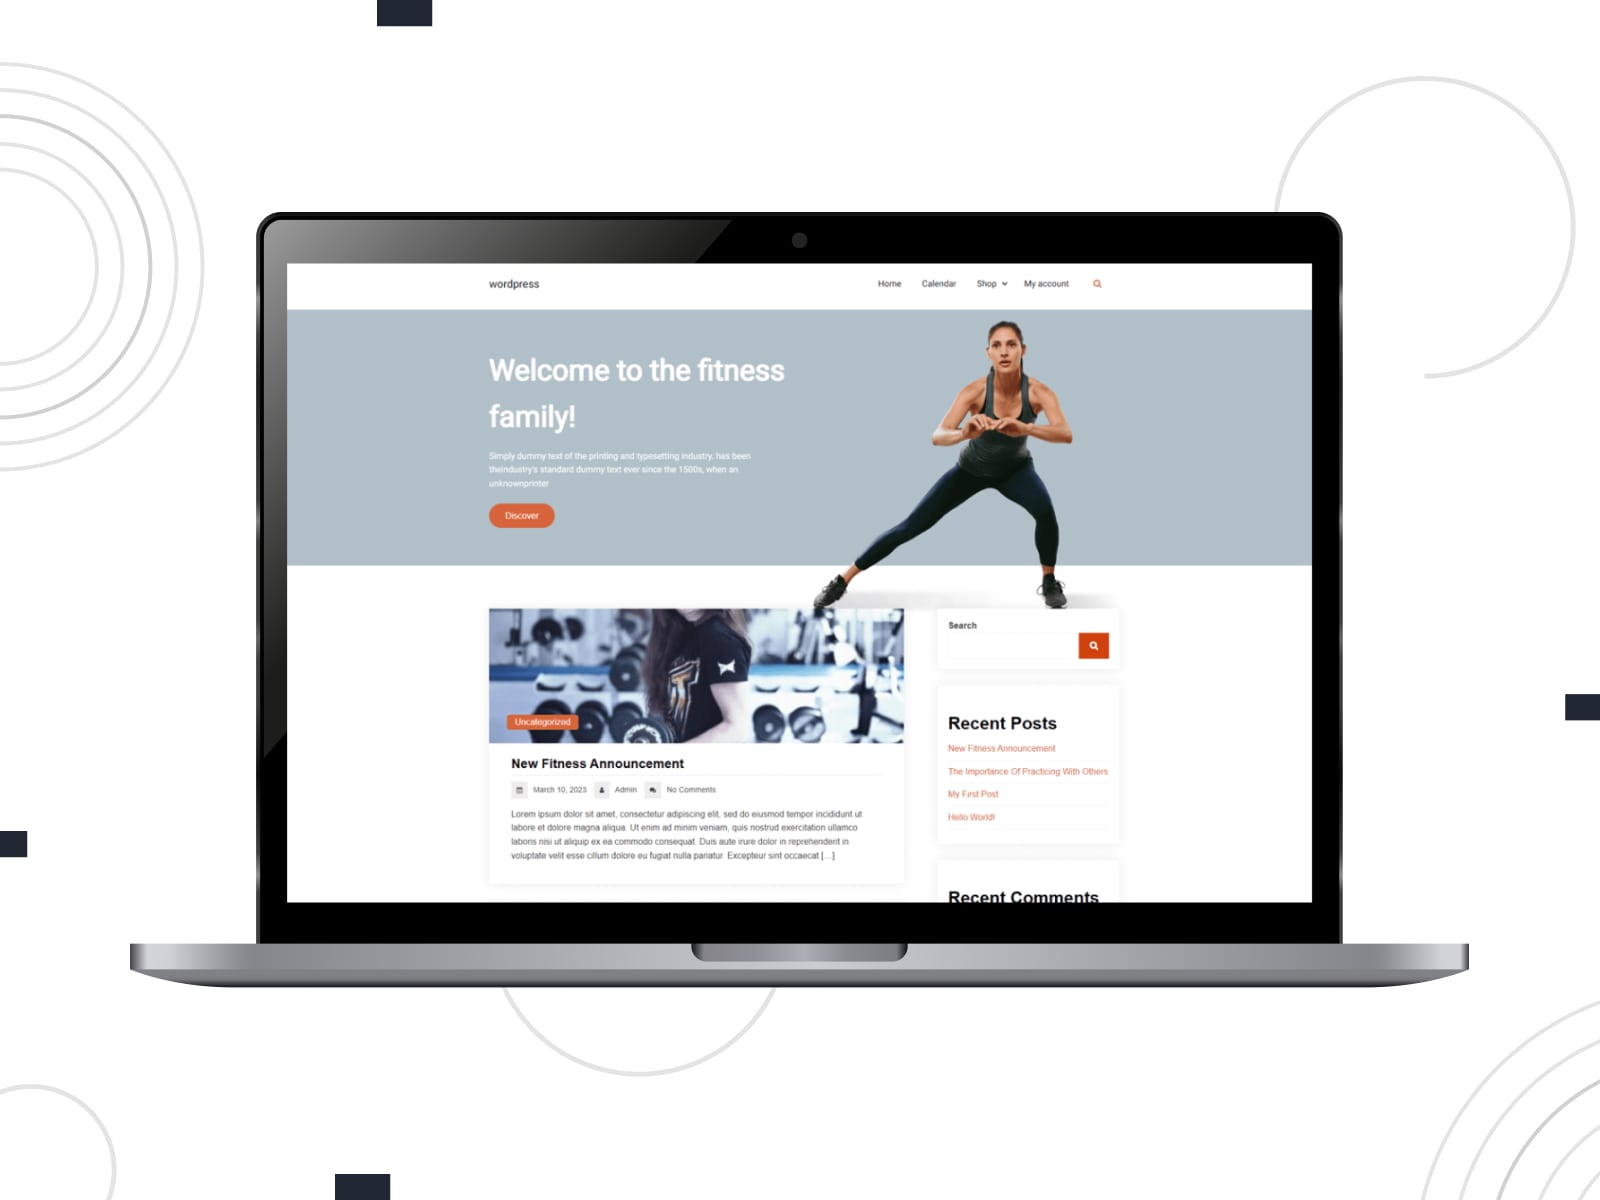 Collage of the Fitness Blog free WordPress theme demo page on the desktop screen.